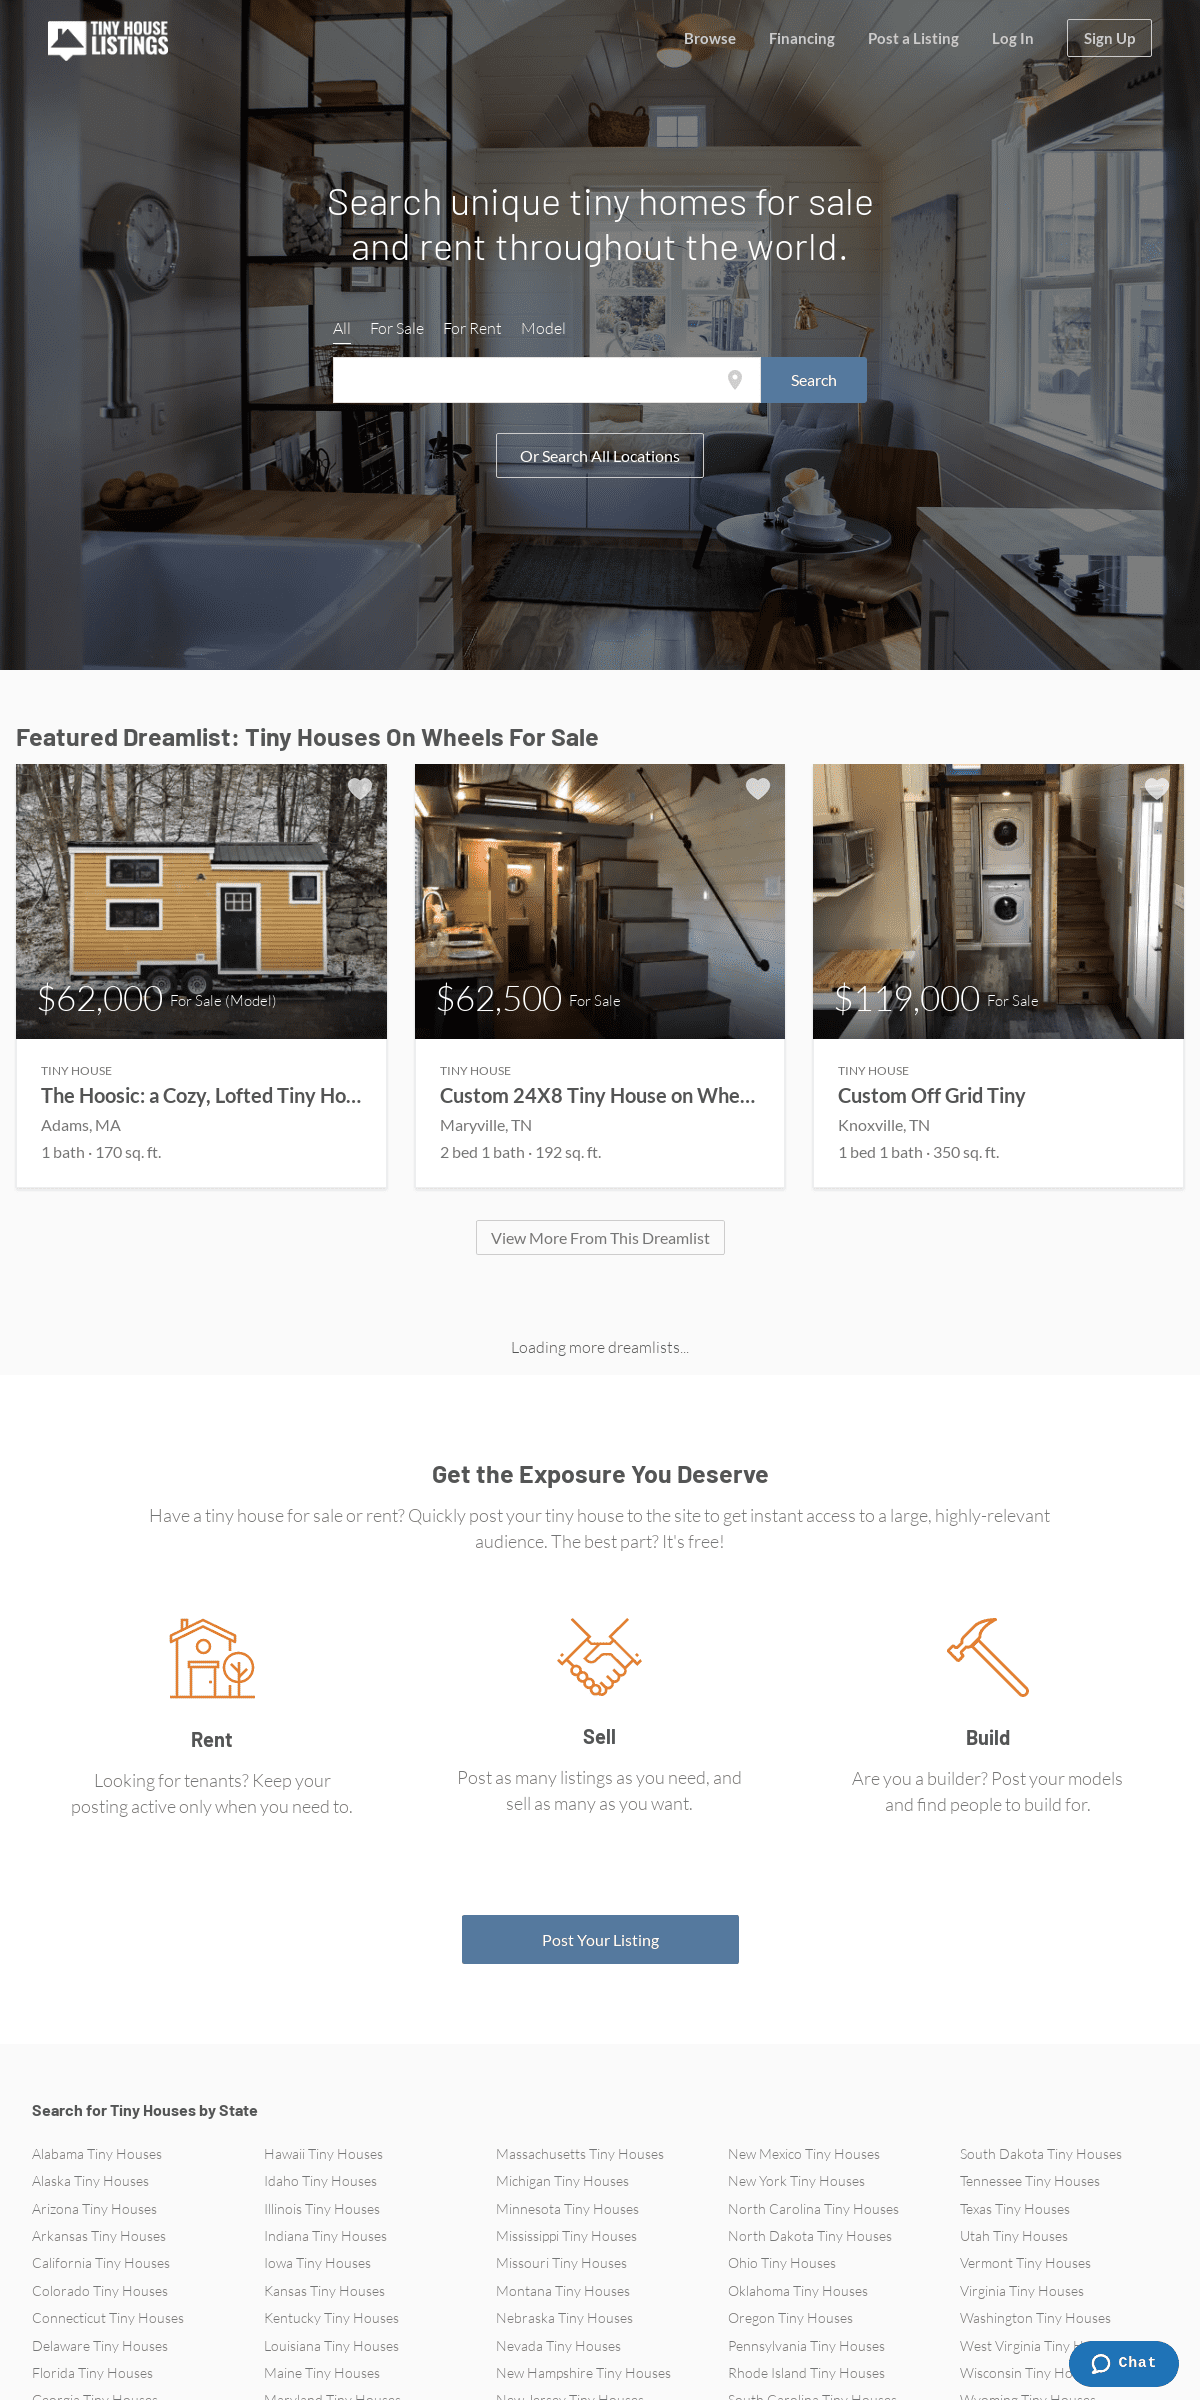 A complete backup of tinyhouselistings.com